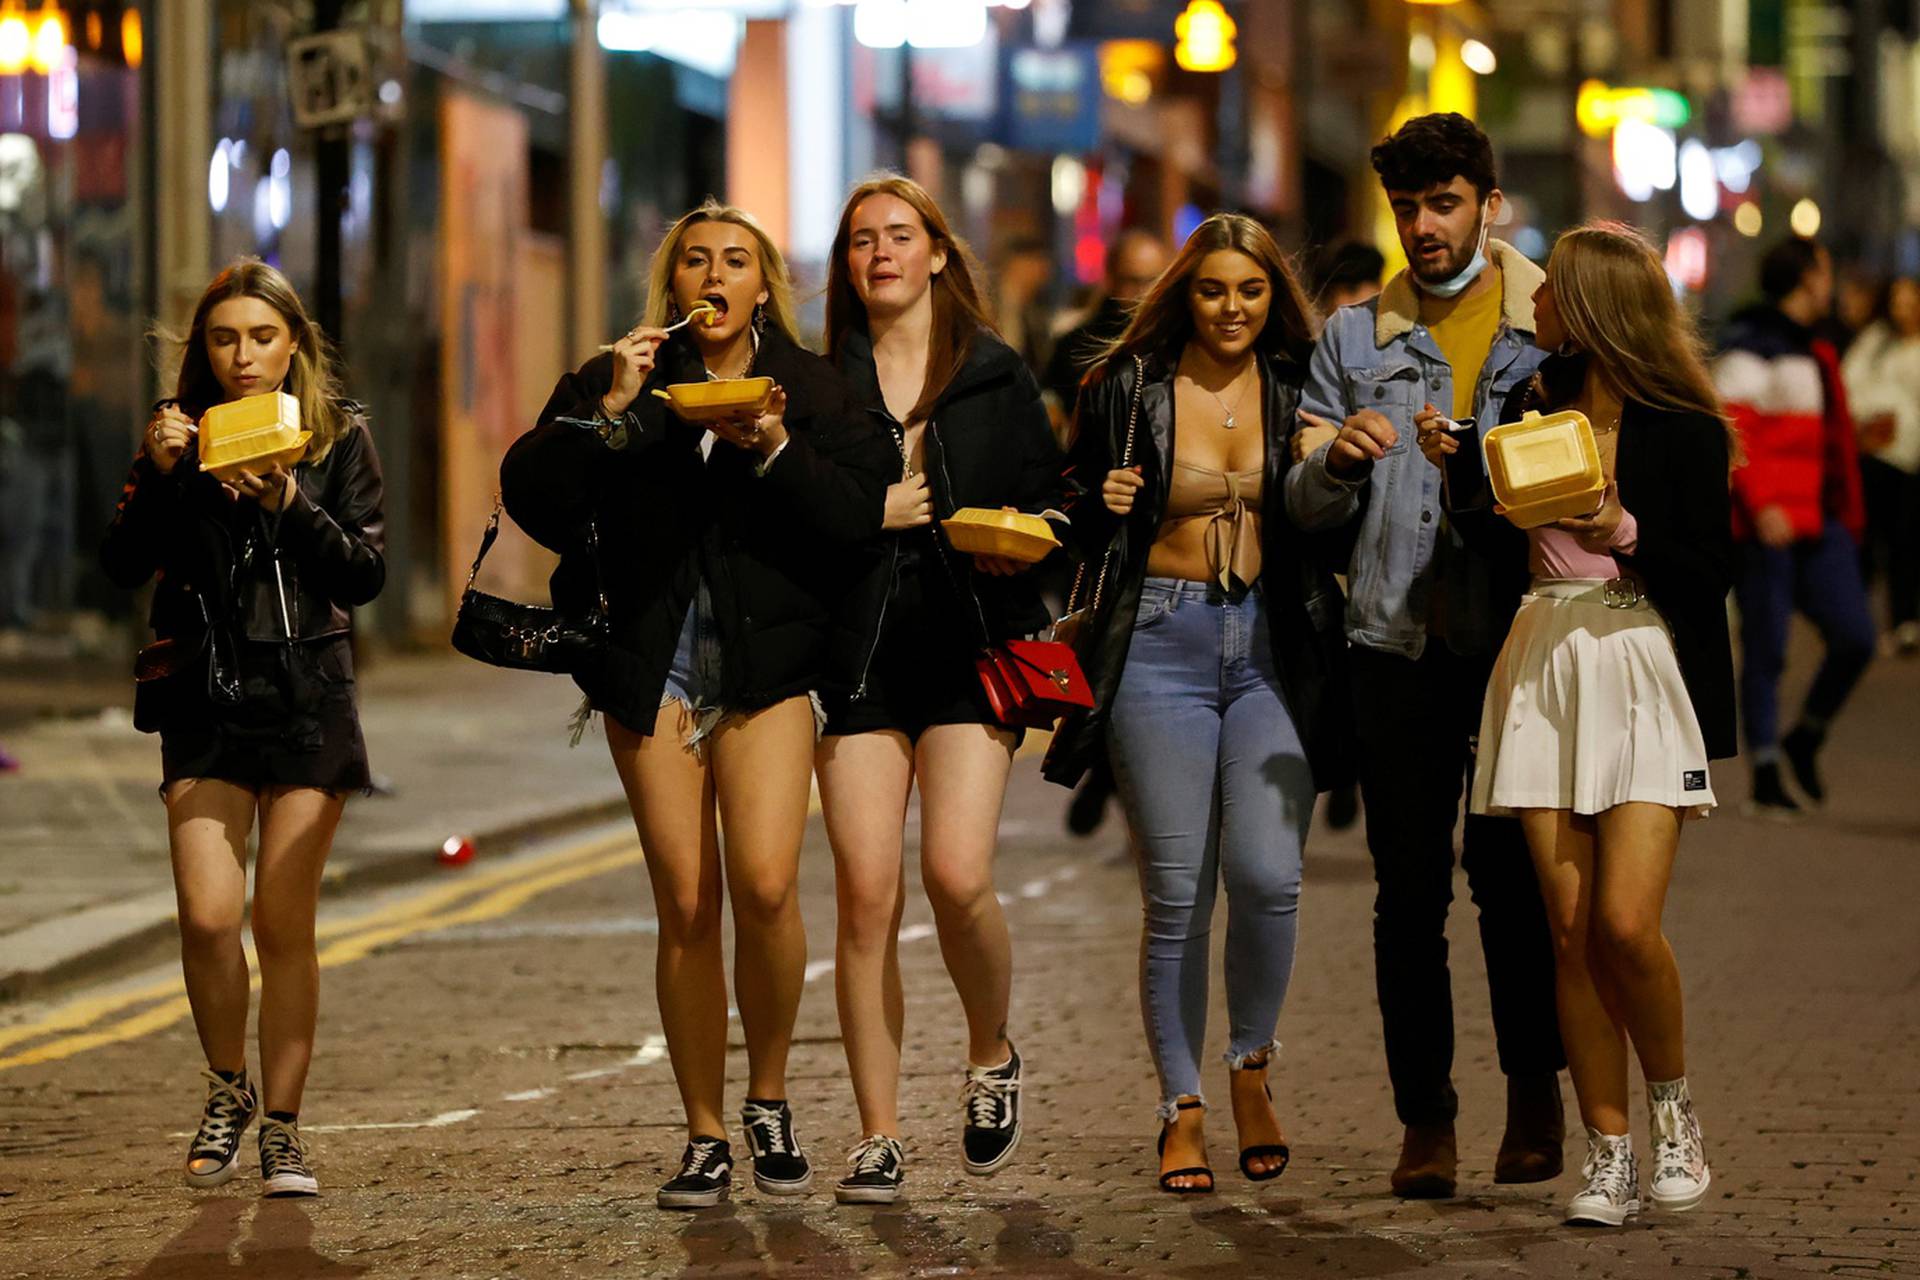 People walk and gather outside bars the night before a local lockdown amidst the spread of the coronavirus disease (COVID-19) in Liverpool